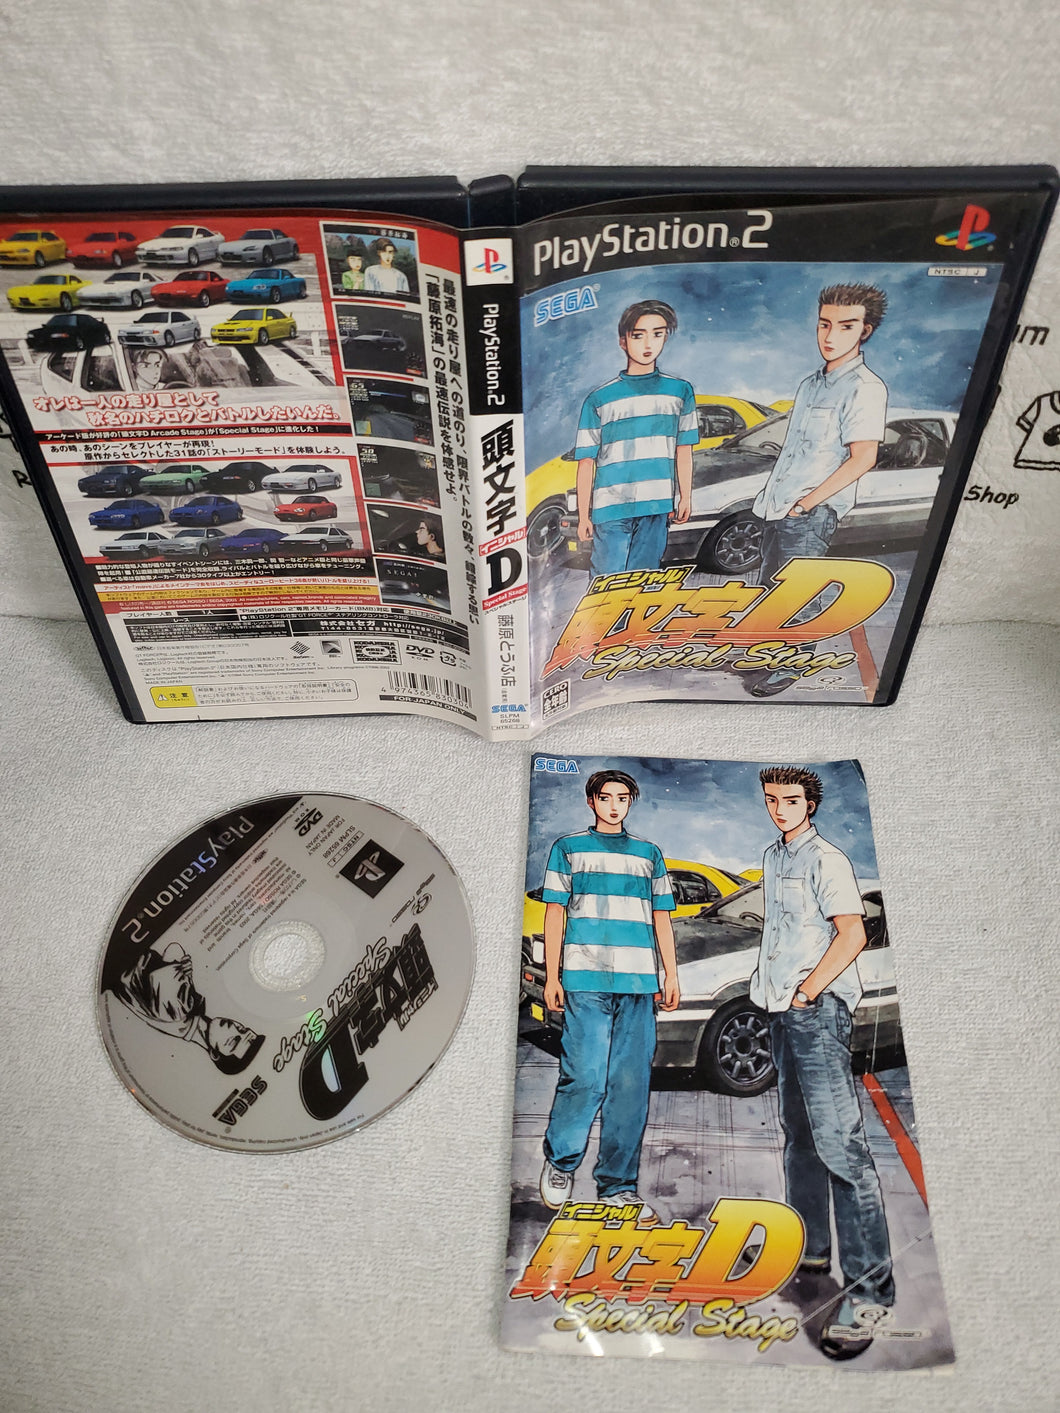 download initial d special stage ps2 iso